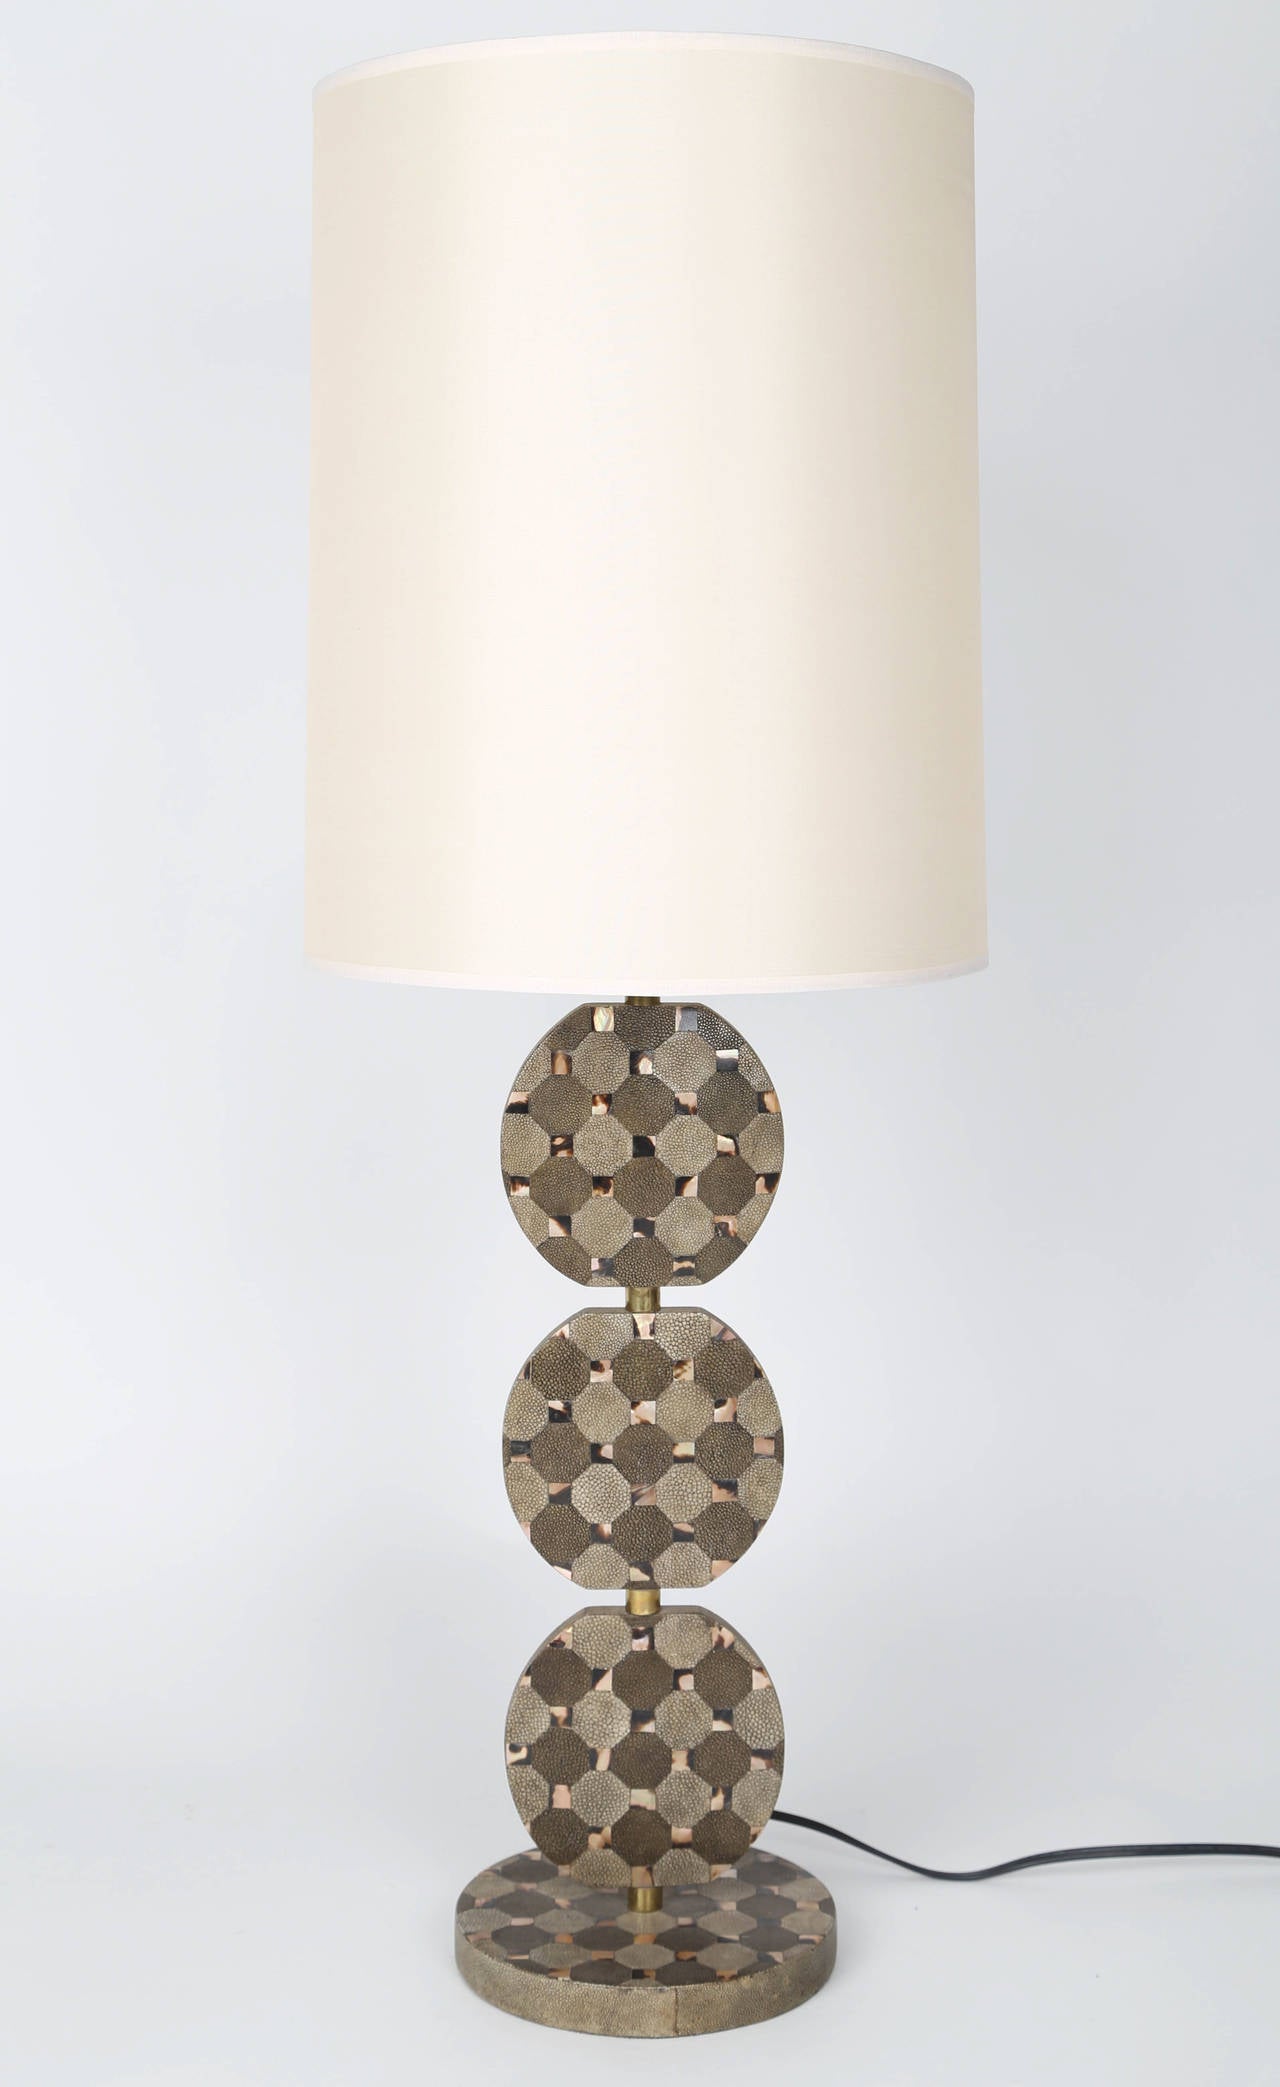 This understated but chic lamp features three rotating discs over a round base, with brass stem and finial. The discs are clad in octagonal shagreen tiles in two shades of grey, with square horn in-fill. Bottom is stamped 